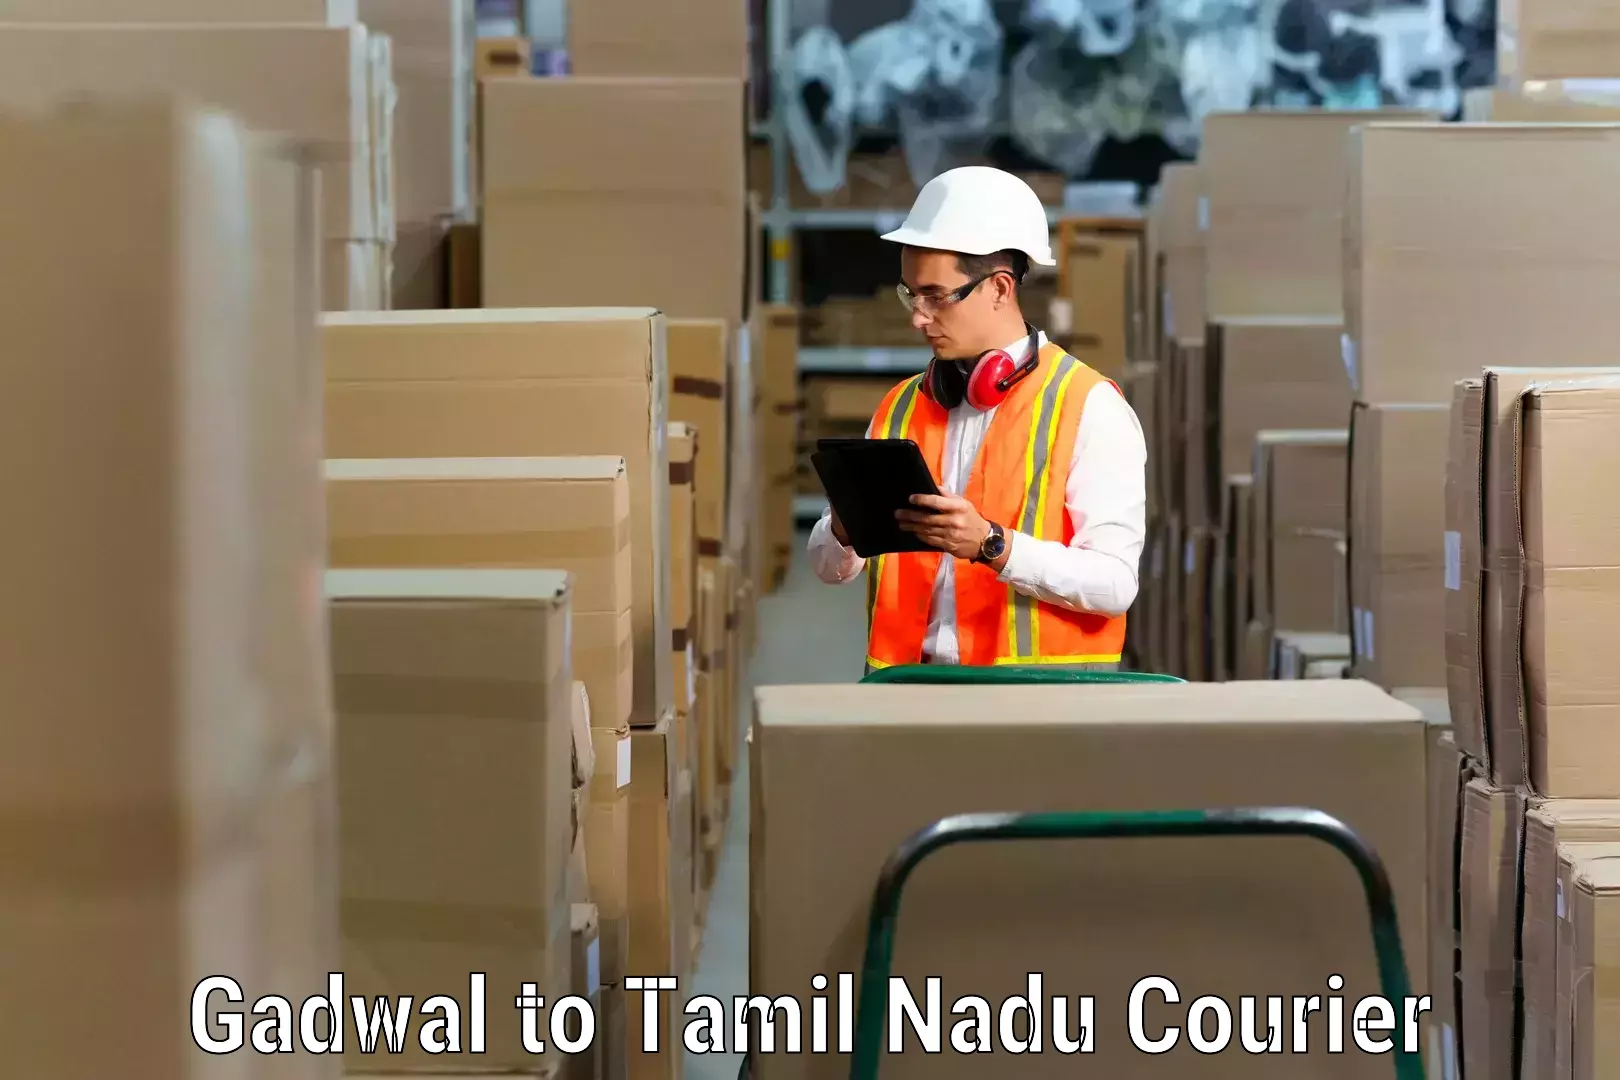 Trusted moving company Gadwal to Tiruvallur